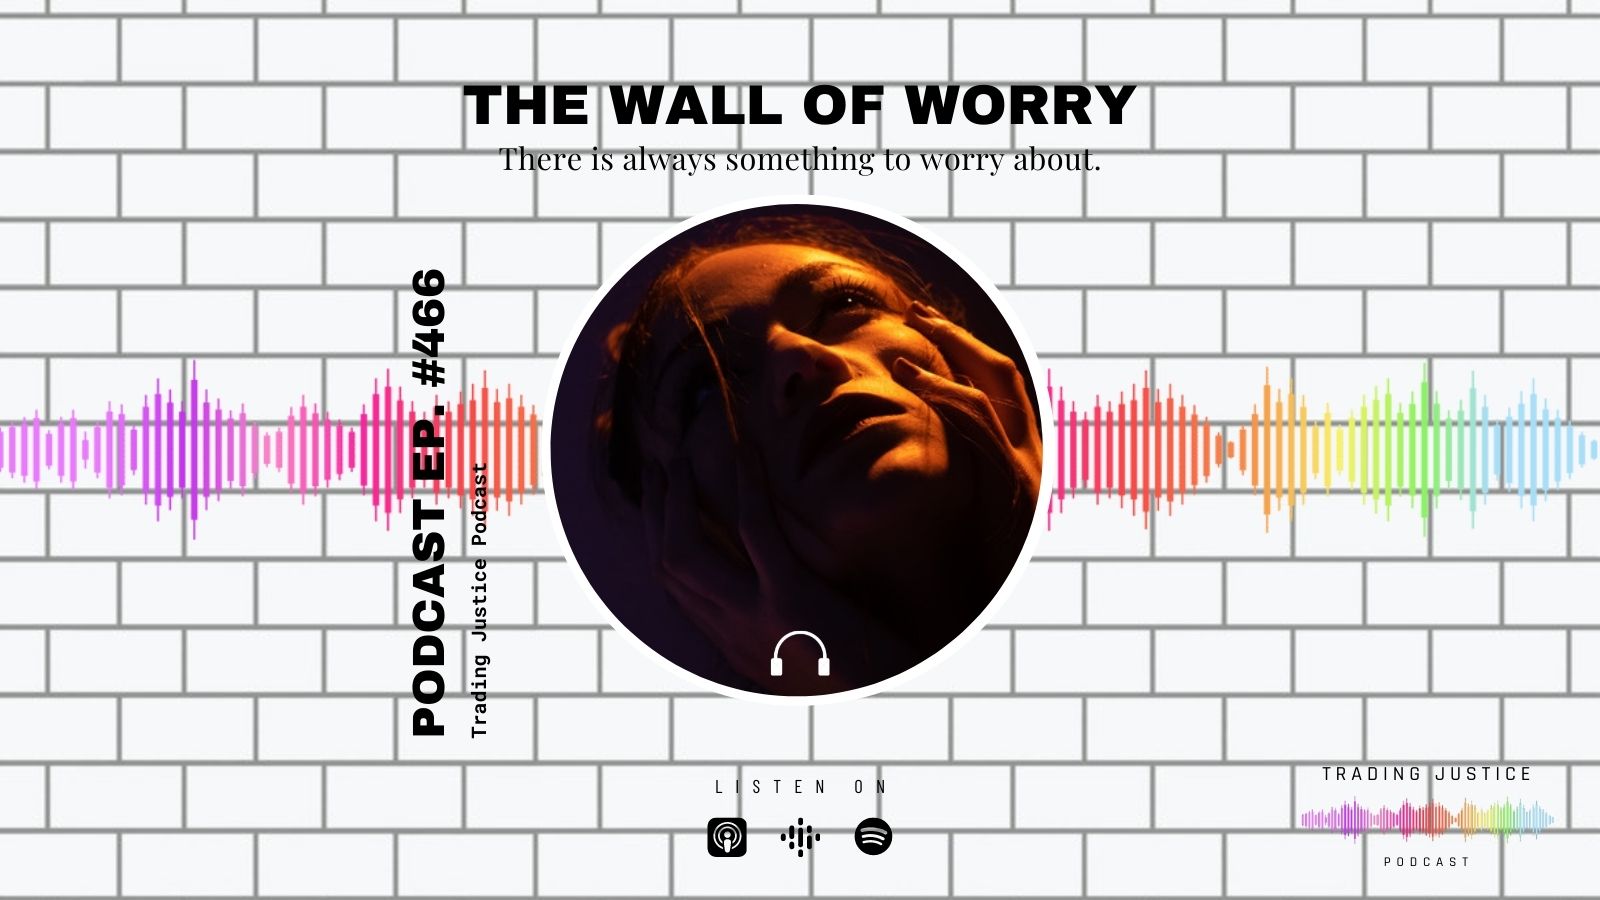 Trading Justice 466: The Wall of Worry